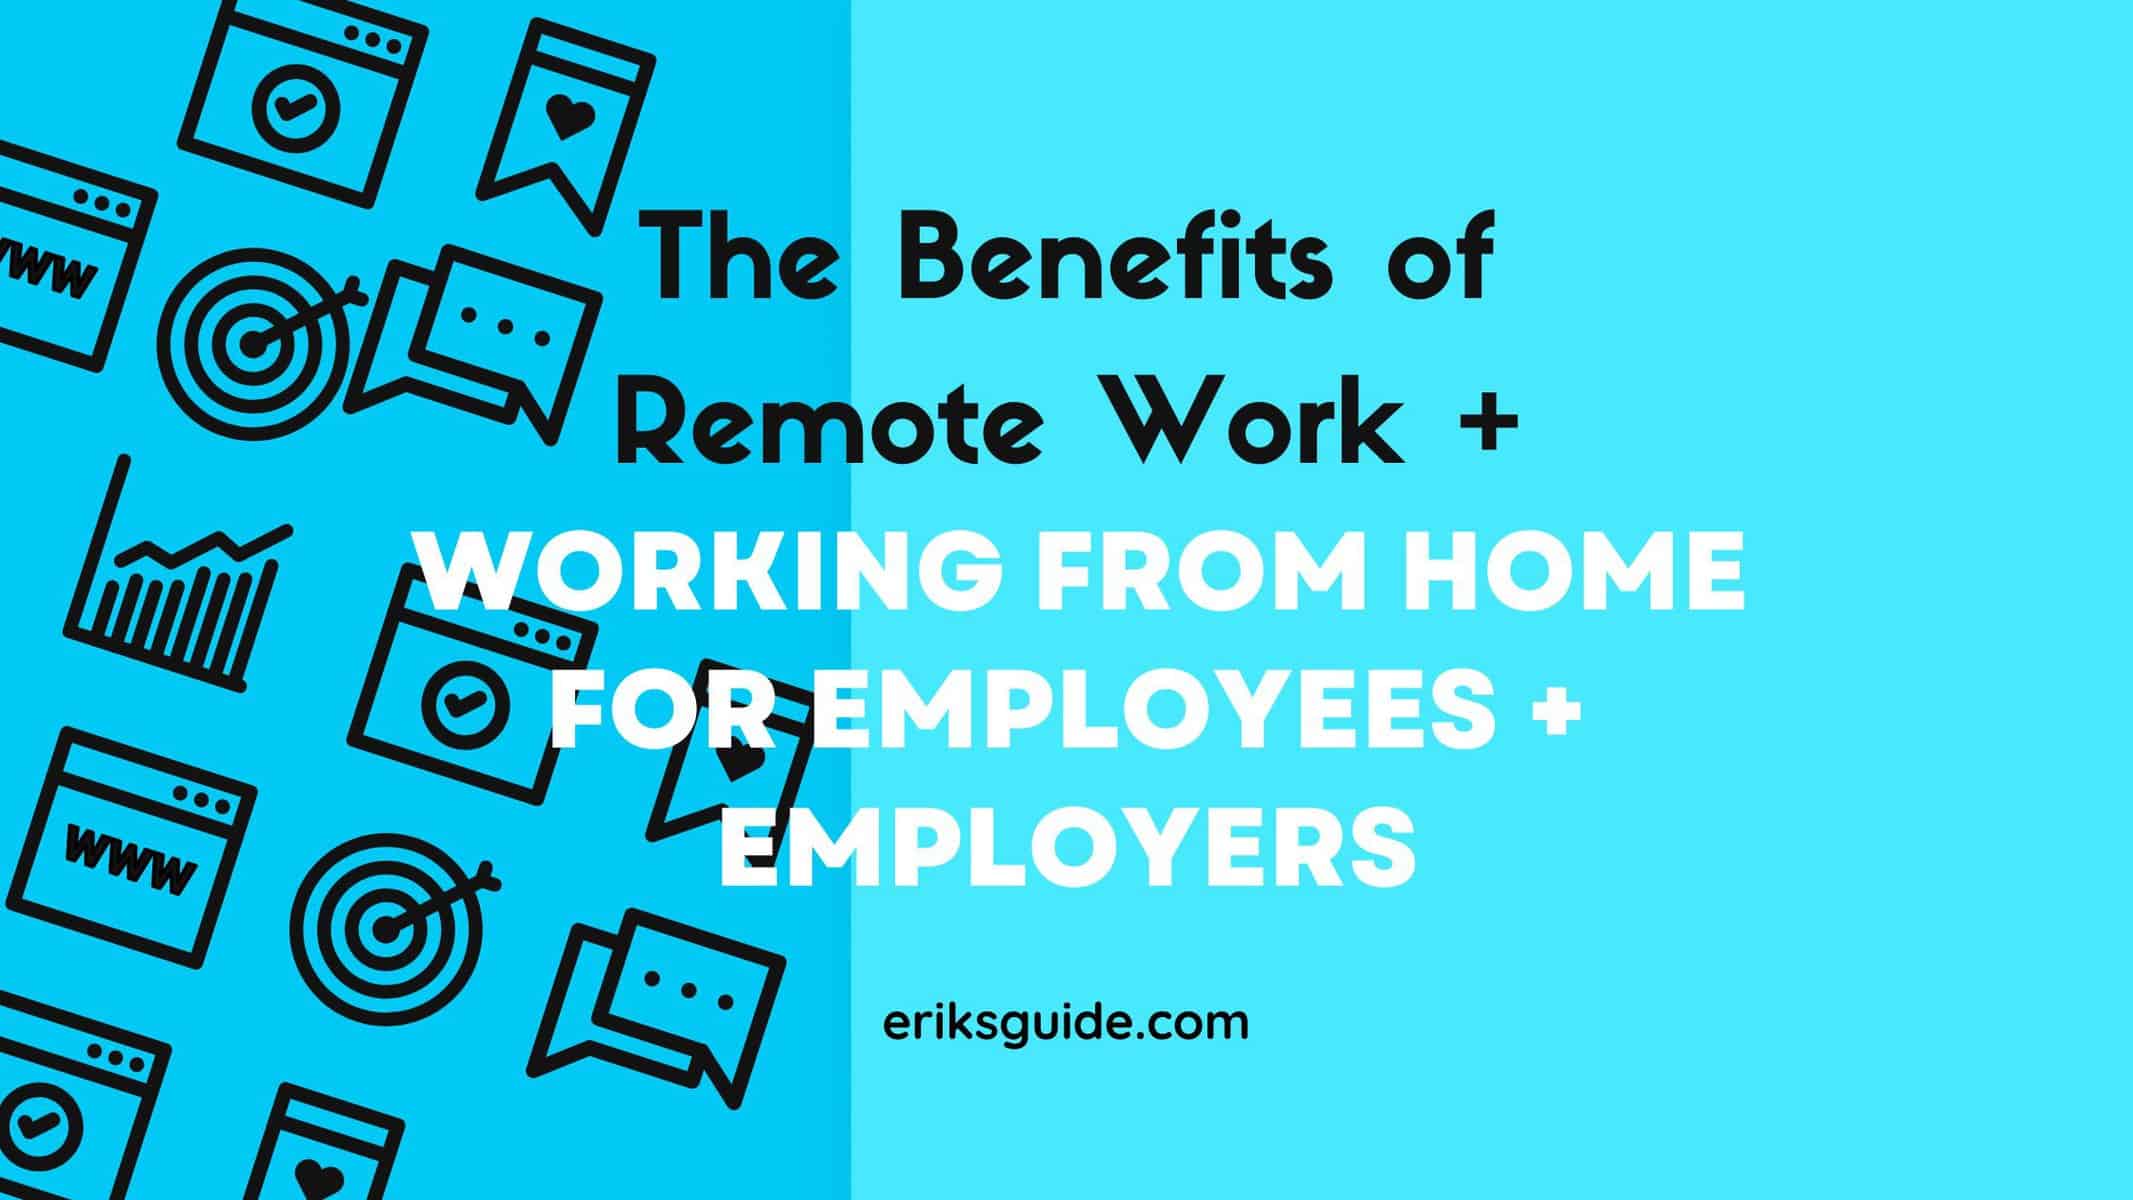 https://eriksguide.com/wp-content/uploads/2023/05/benefits-of-remote-work-working-from-home.jpg